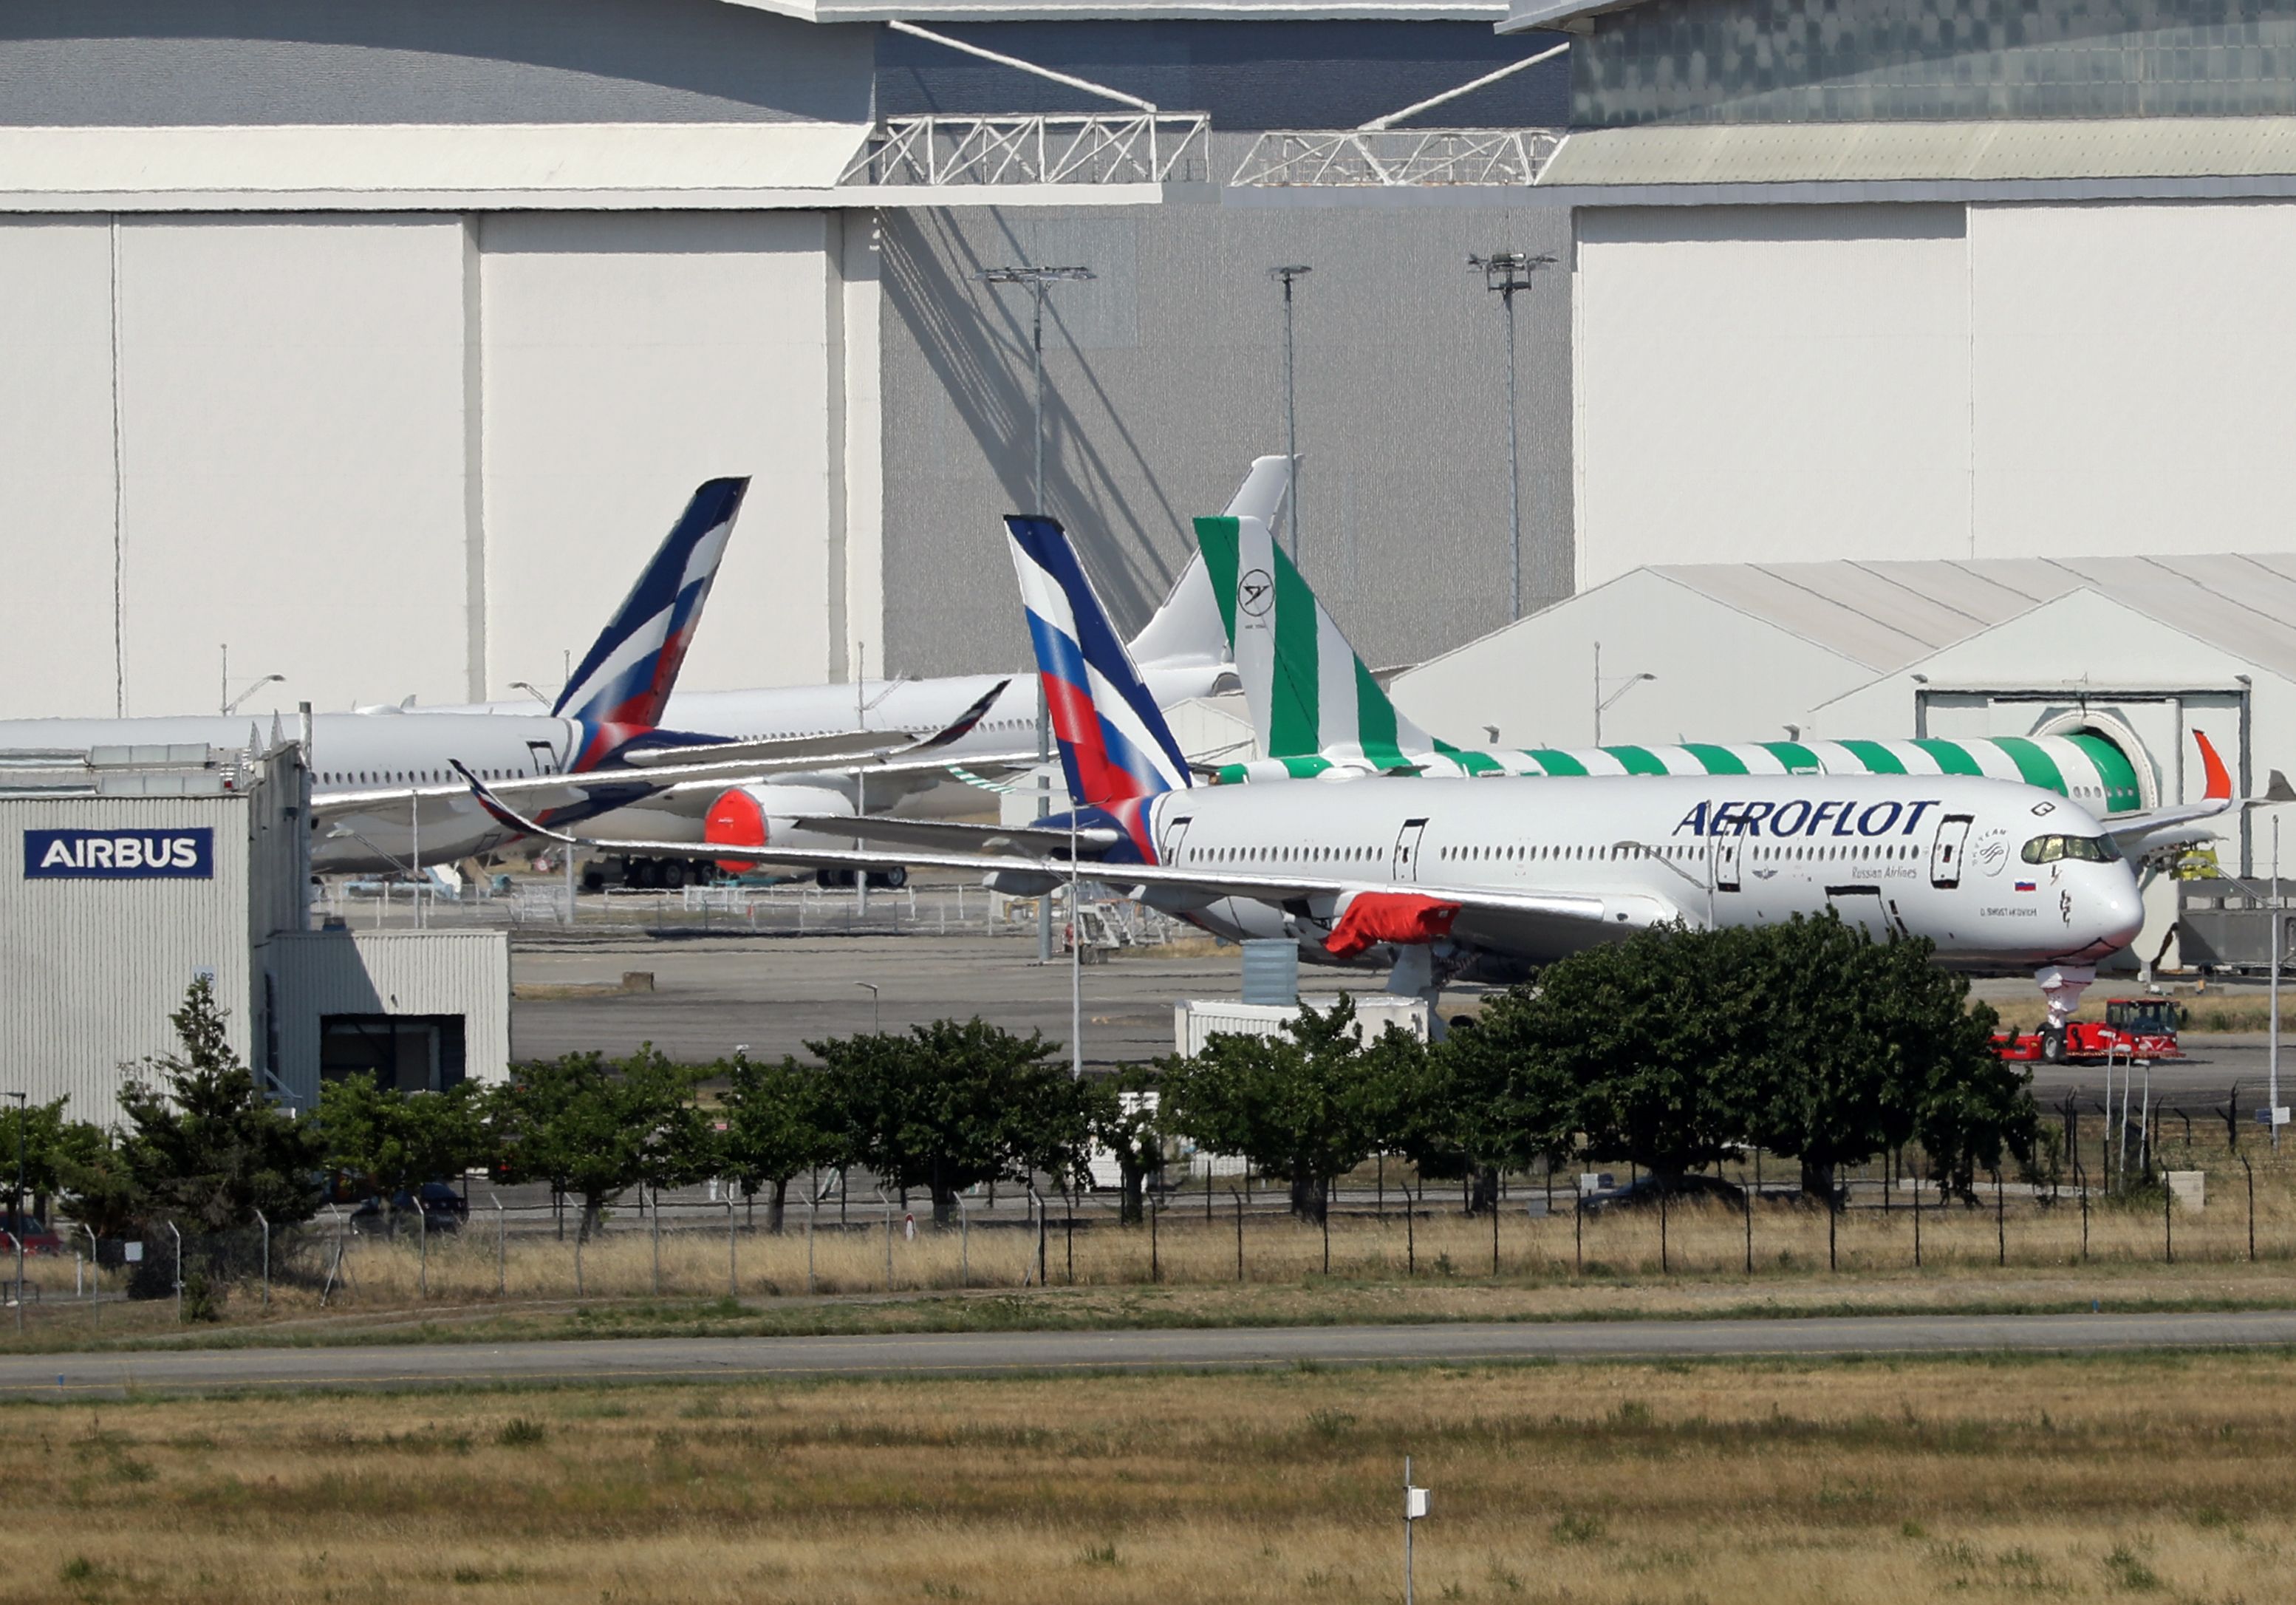 Aeroflot A350 aircraft parked by hangar in Toulouse 